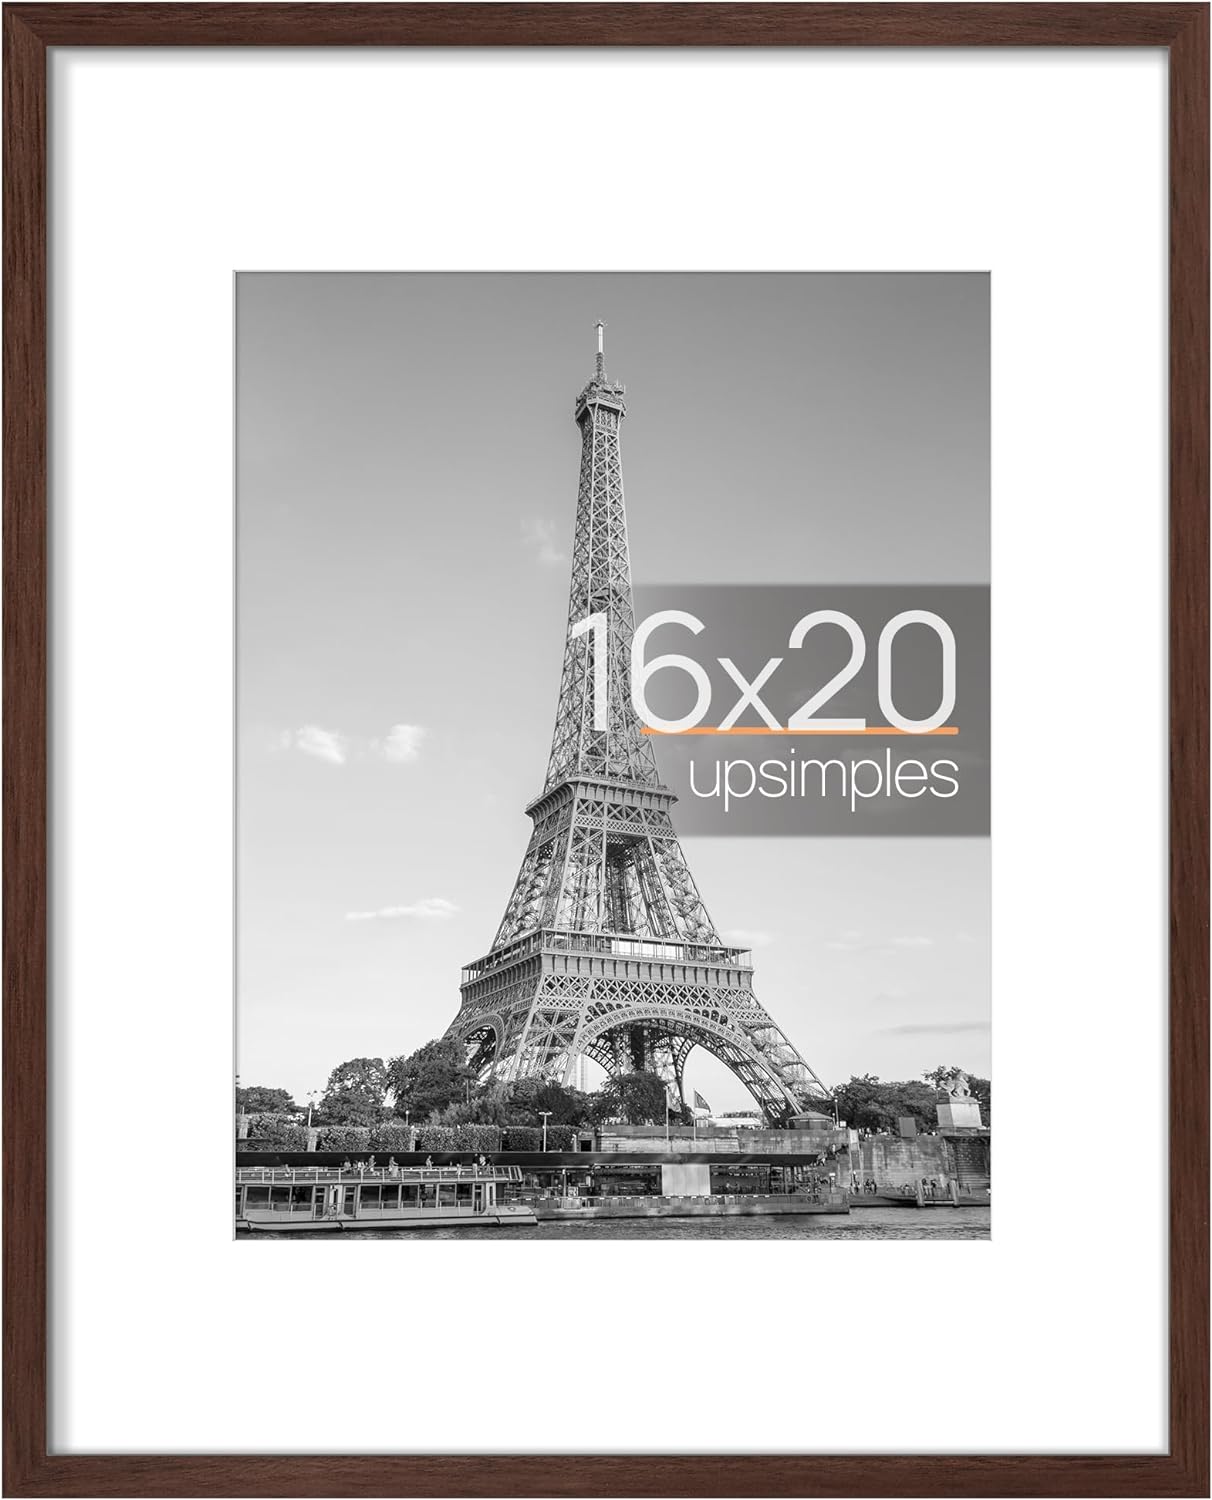 ENJOYBASICS 16x20 Picture Frame, Display Poster 11x14 with Mat or